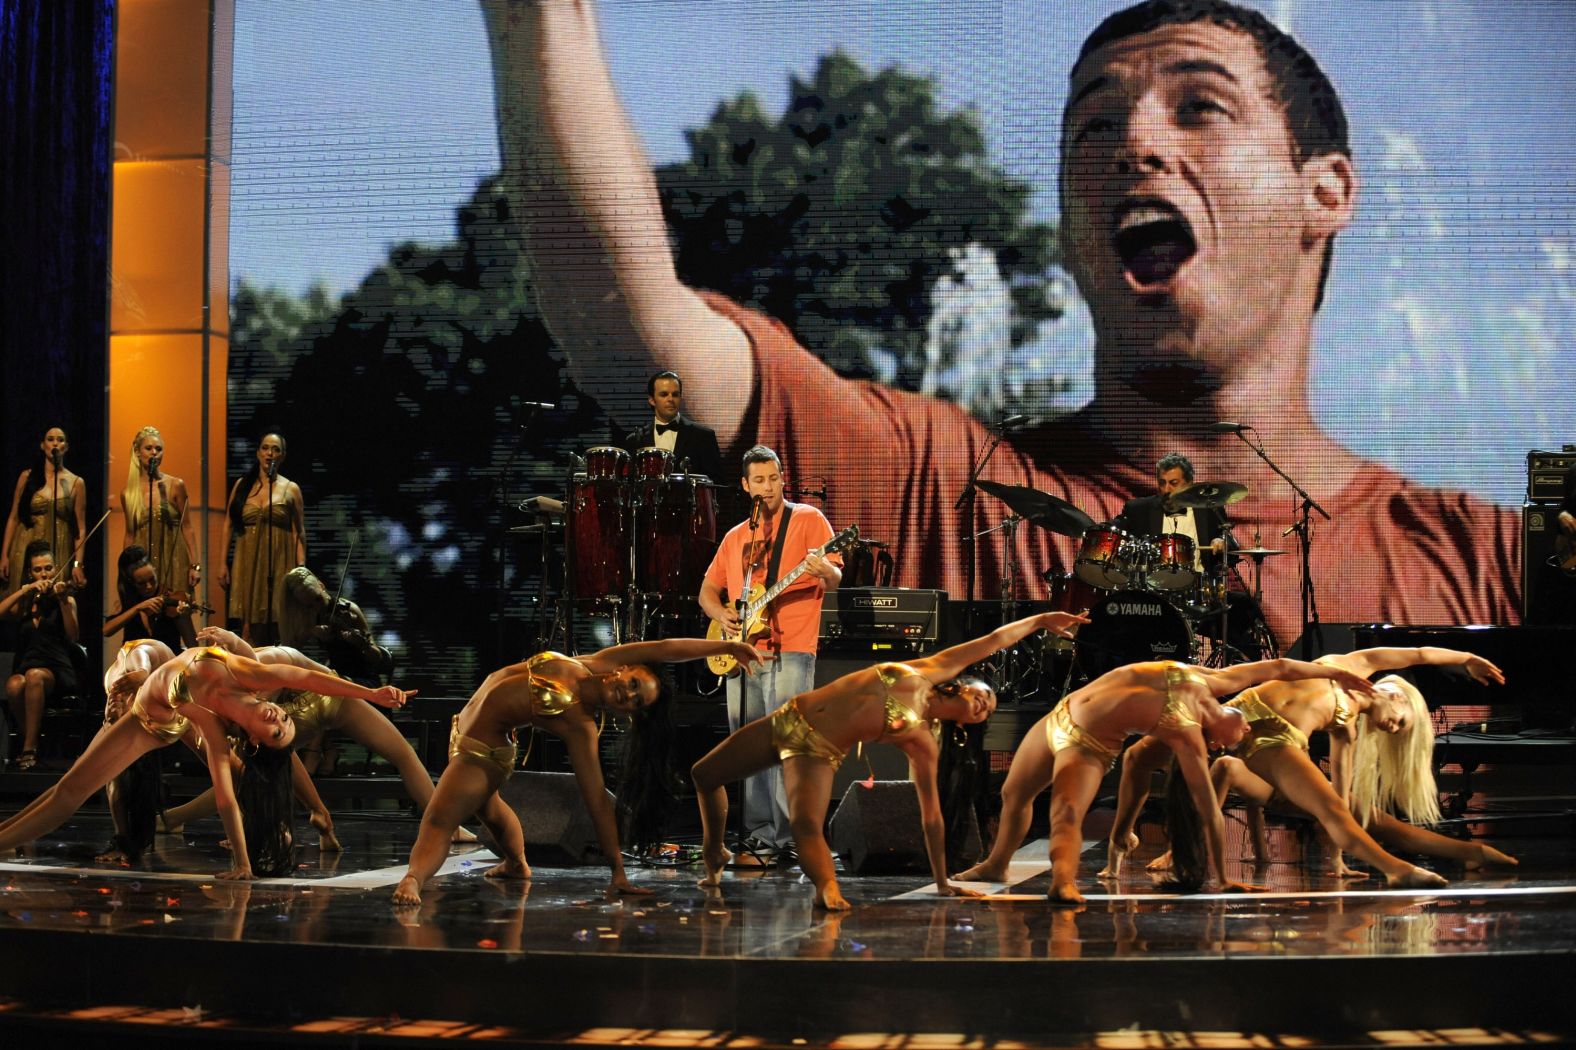 Sandler performs "Nobody Does It Better," the theme from the 1977 James Bond film "The Spy Who Loved Me," at the 2008 MTV Movie Awards. Sandler was being honored with the MTV Generation Award.